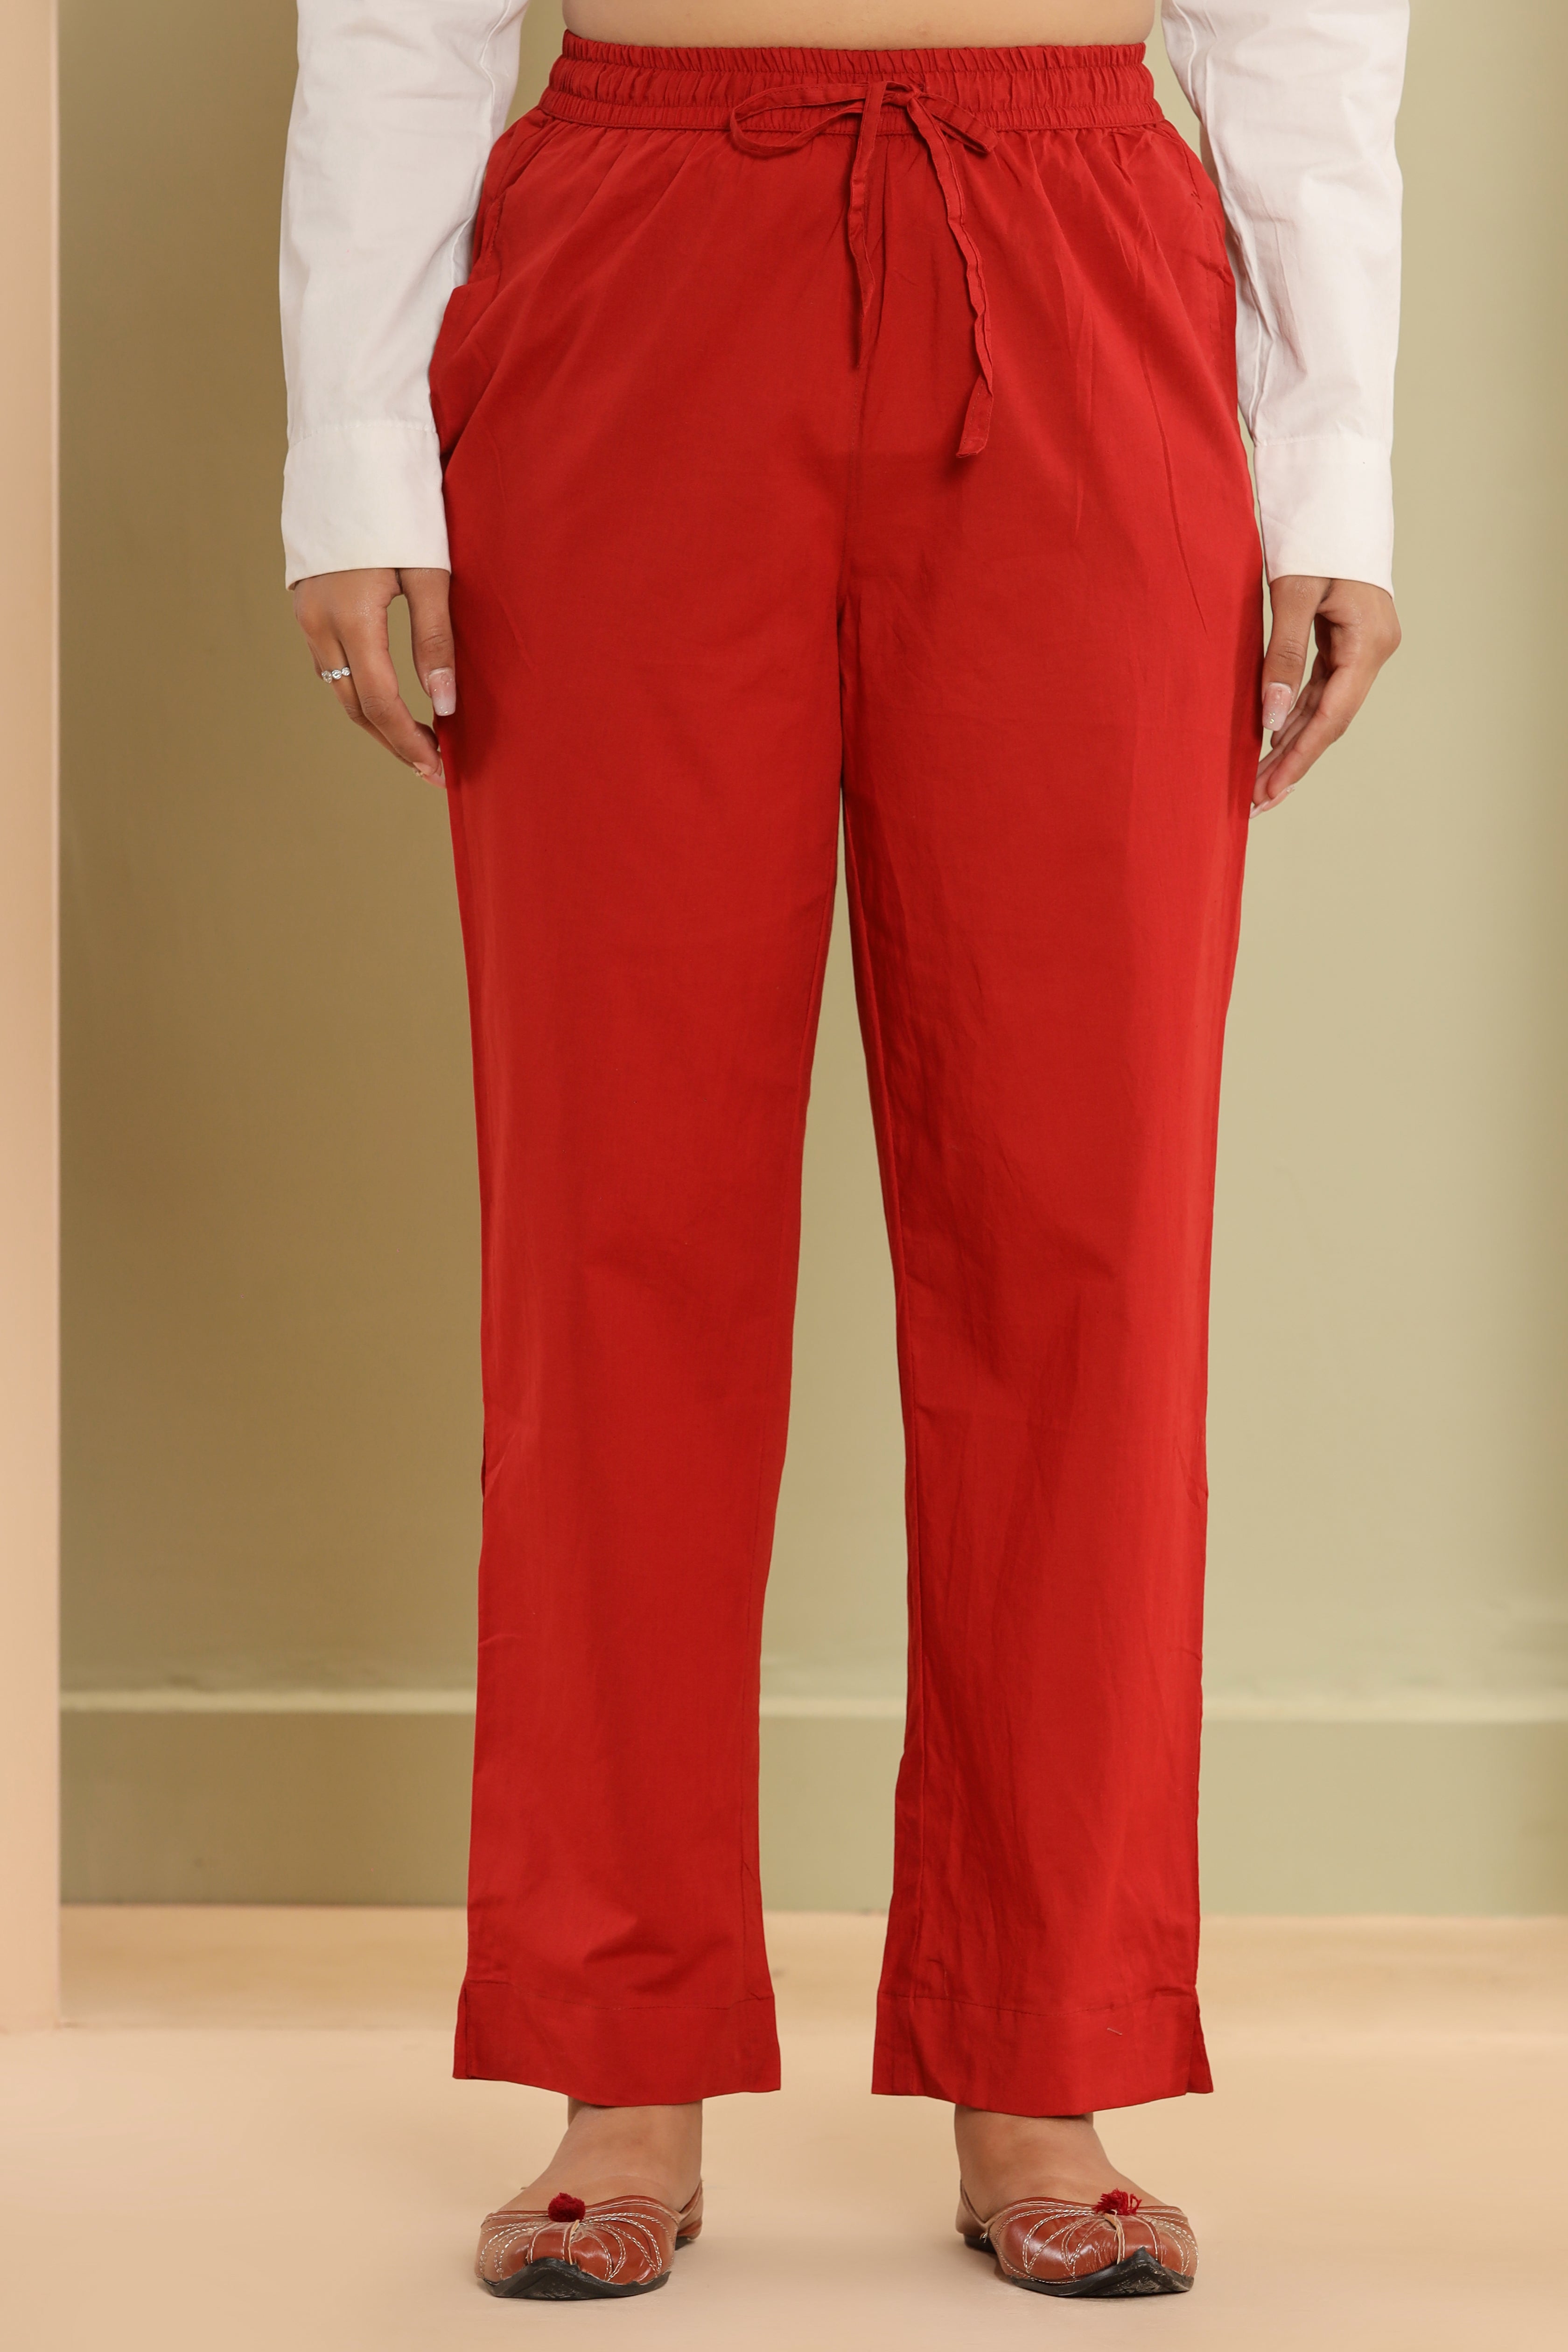 Bagru Red Cotton Cambric Lounge Pant